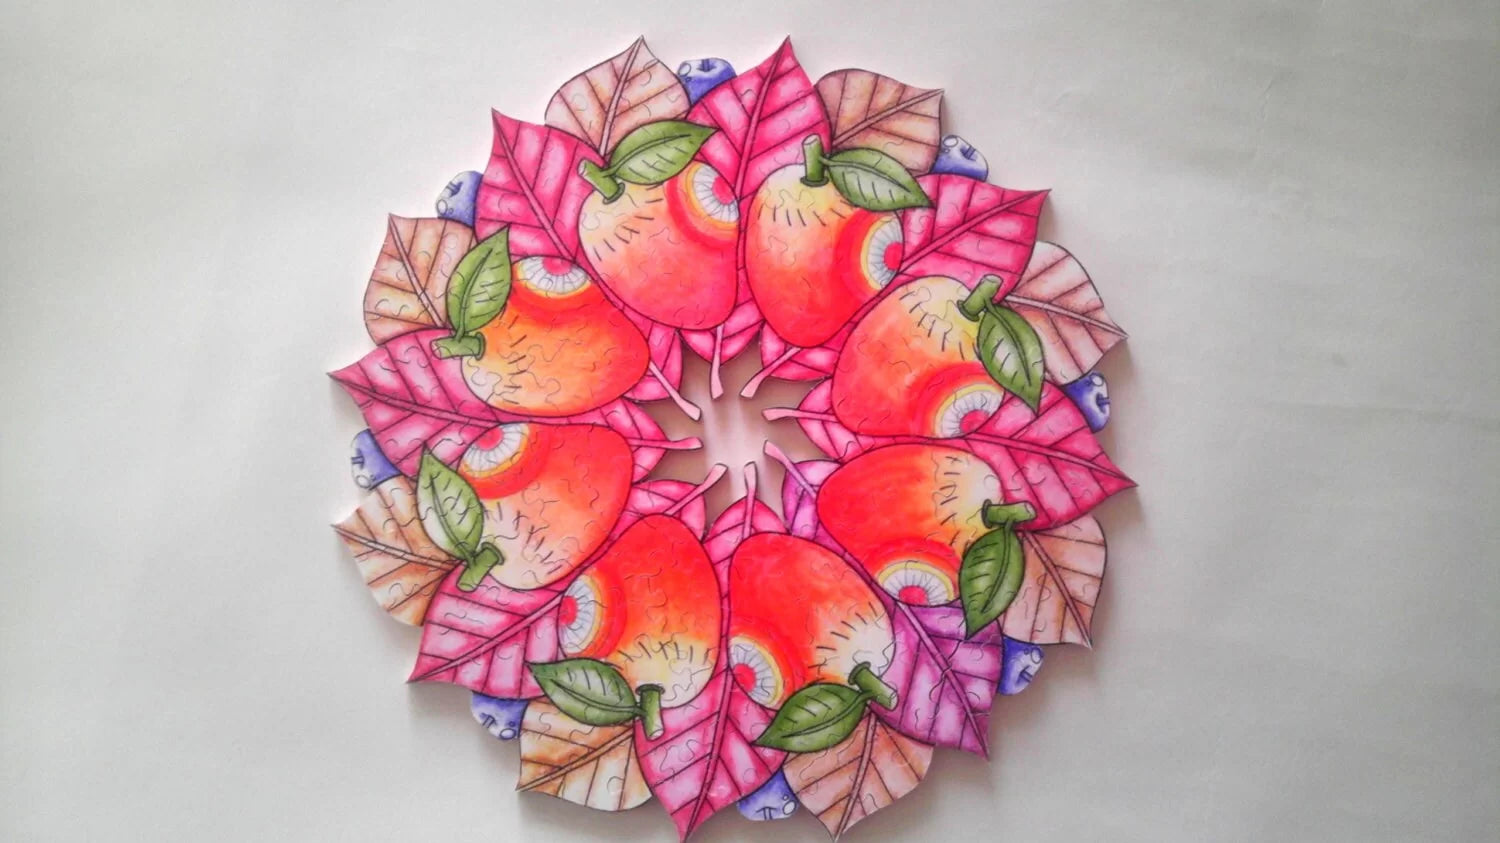 Mr Gogo Puzzles - Fruity Circle Hand-cut Wooden Jigsaw Puzzle